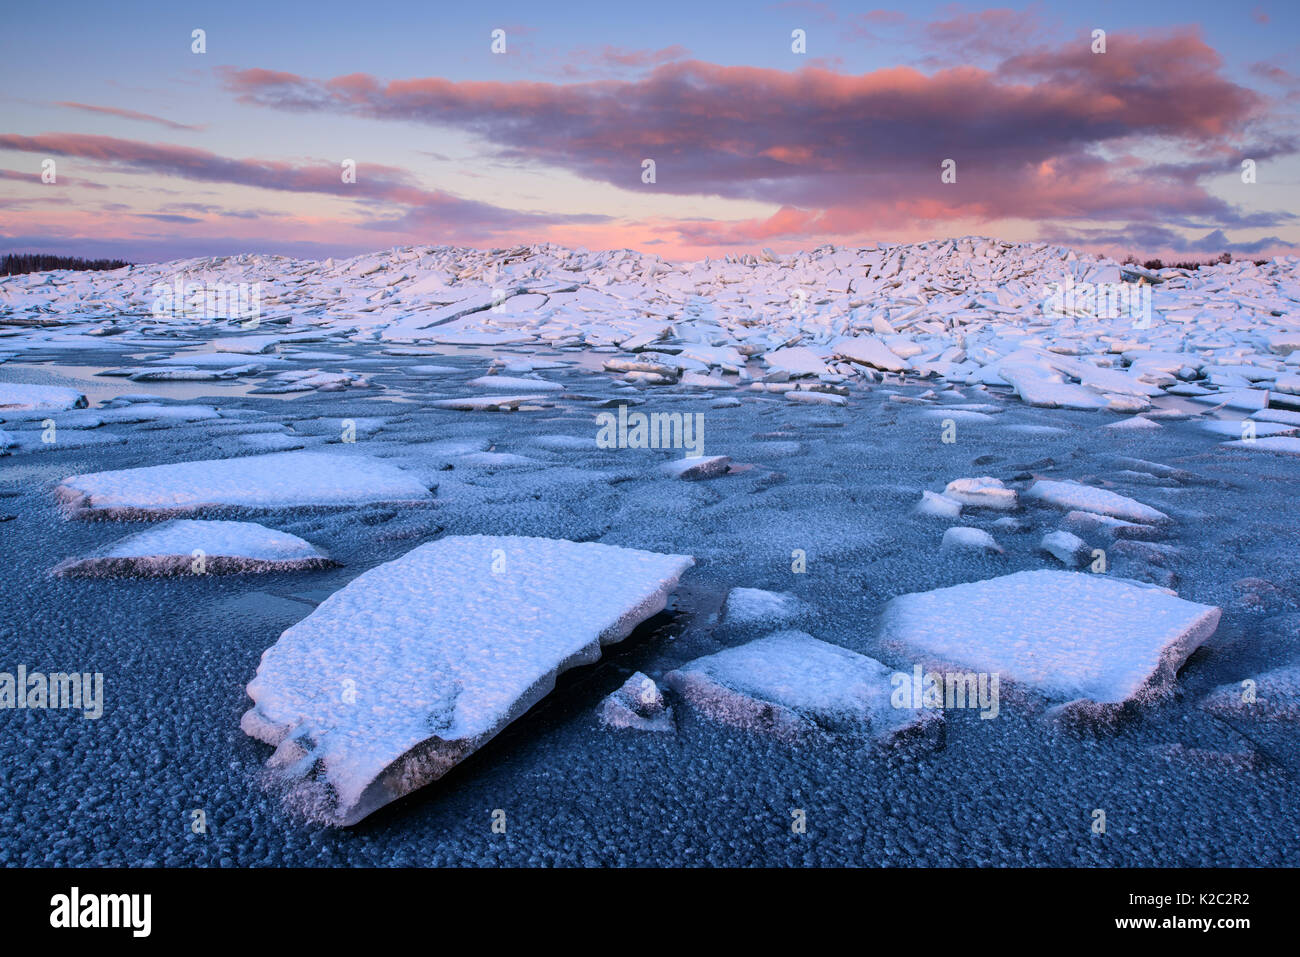 Broken ice covered in snow at sunset, on the shore of Lake Vortsjarv, gathered to shore by extreme winds, Estonia. December 2014. Stock Photo